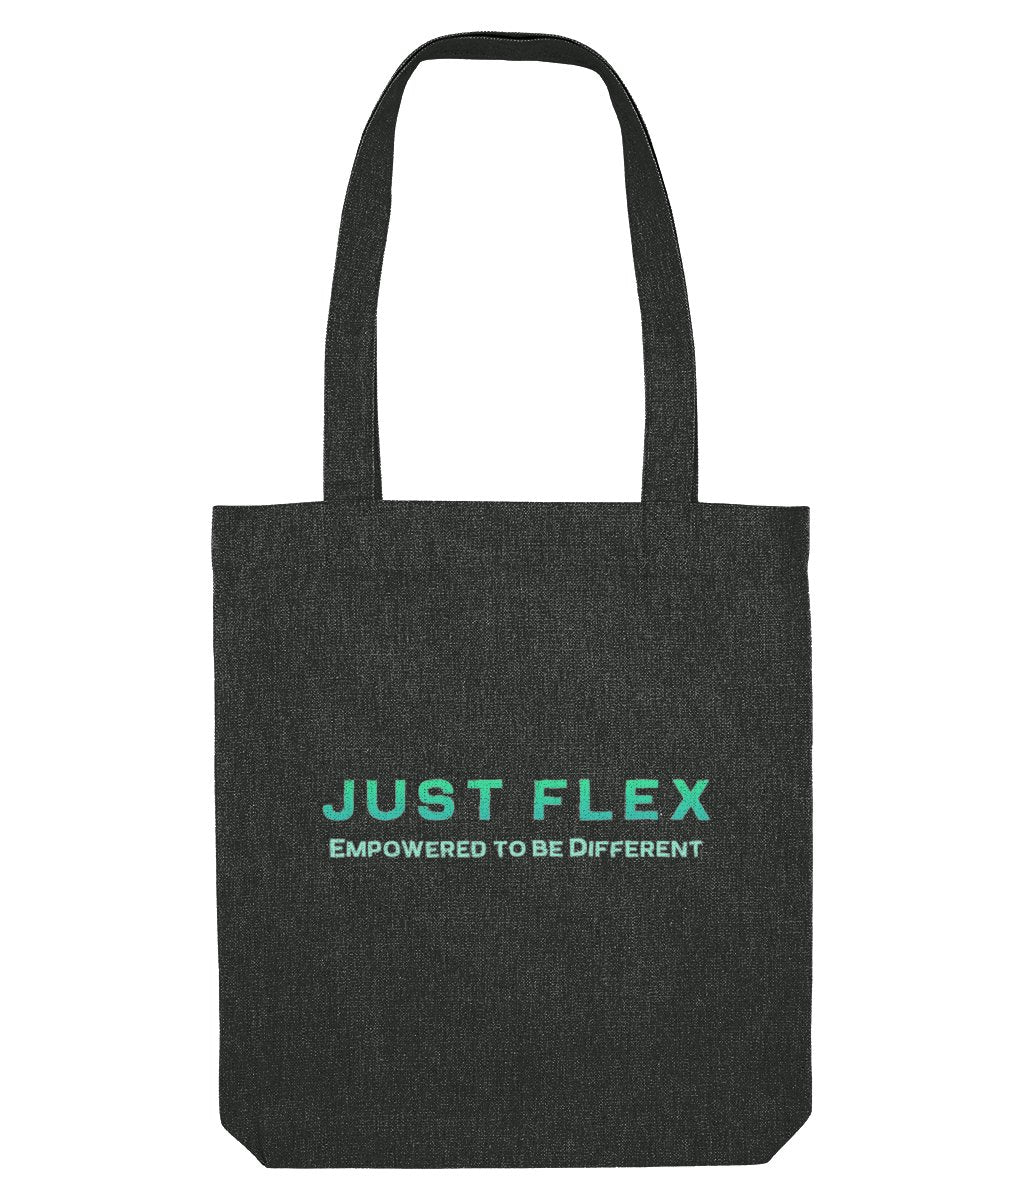 Just Flex - Empowered To Be Different Shoulder Tote Bag